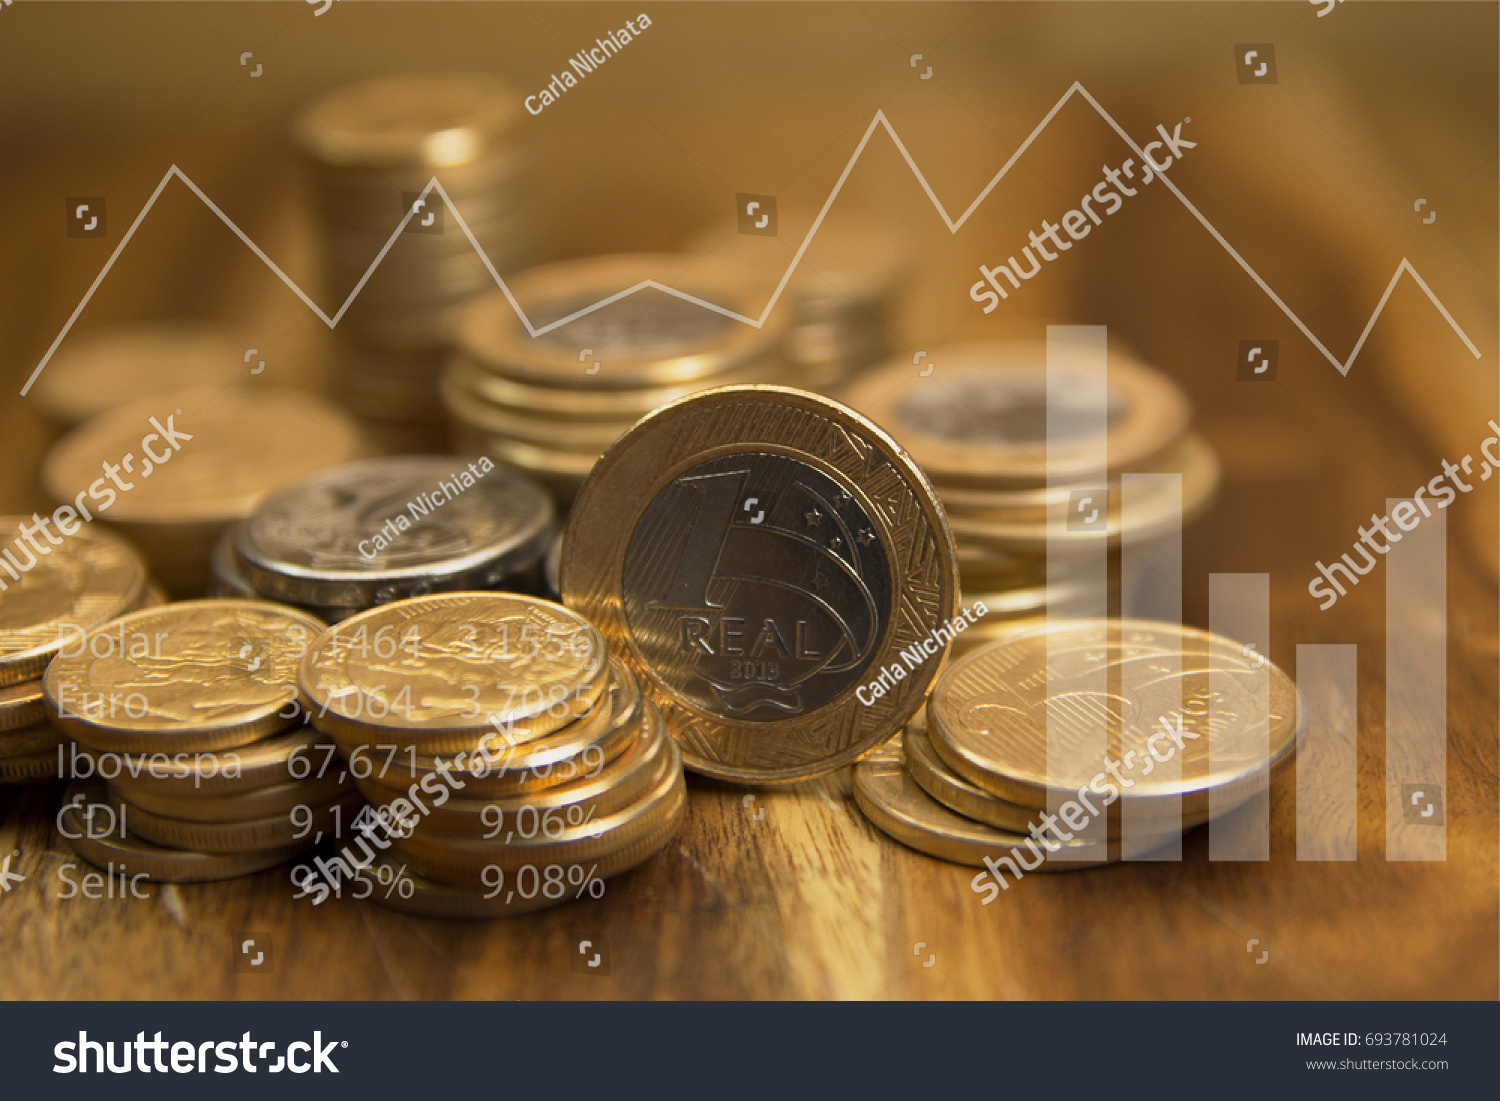 Brazilian coins and graphics. Economic indicators of Brazil. Selective focus and double exposure. #693781024